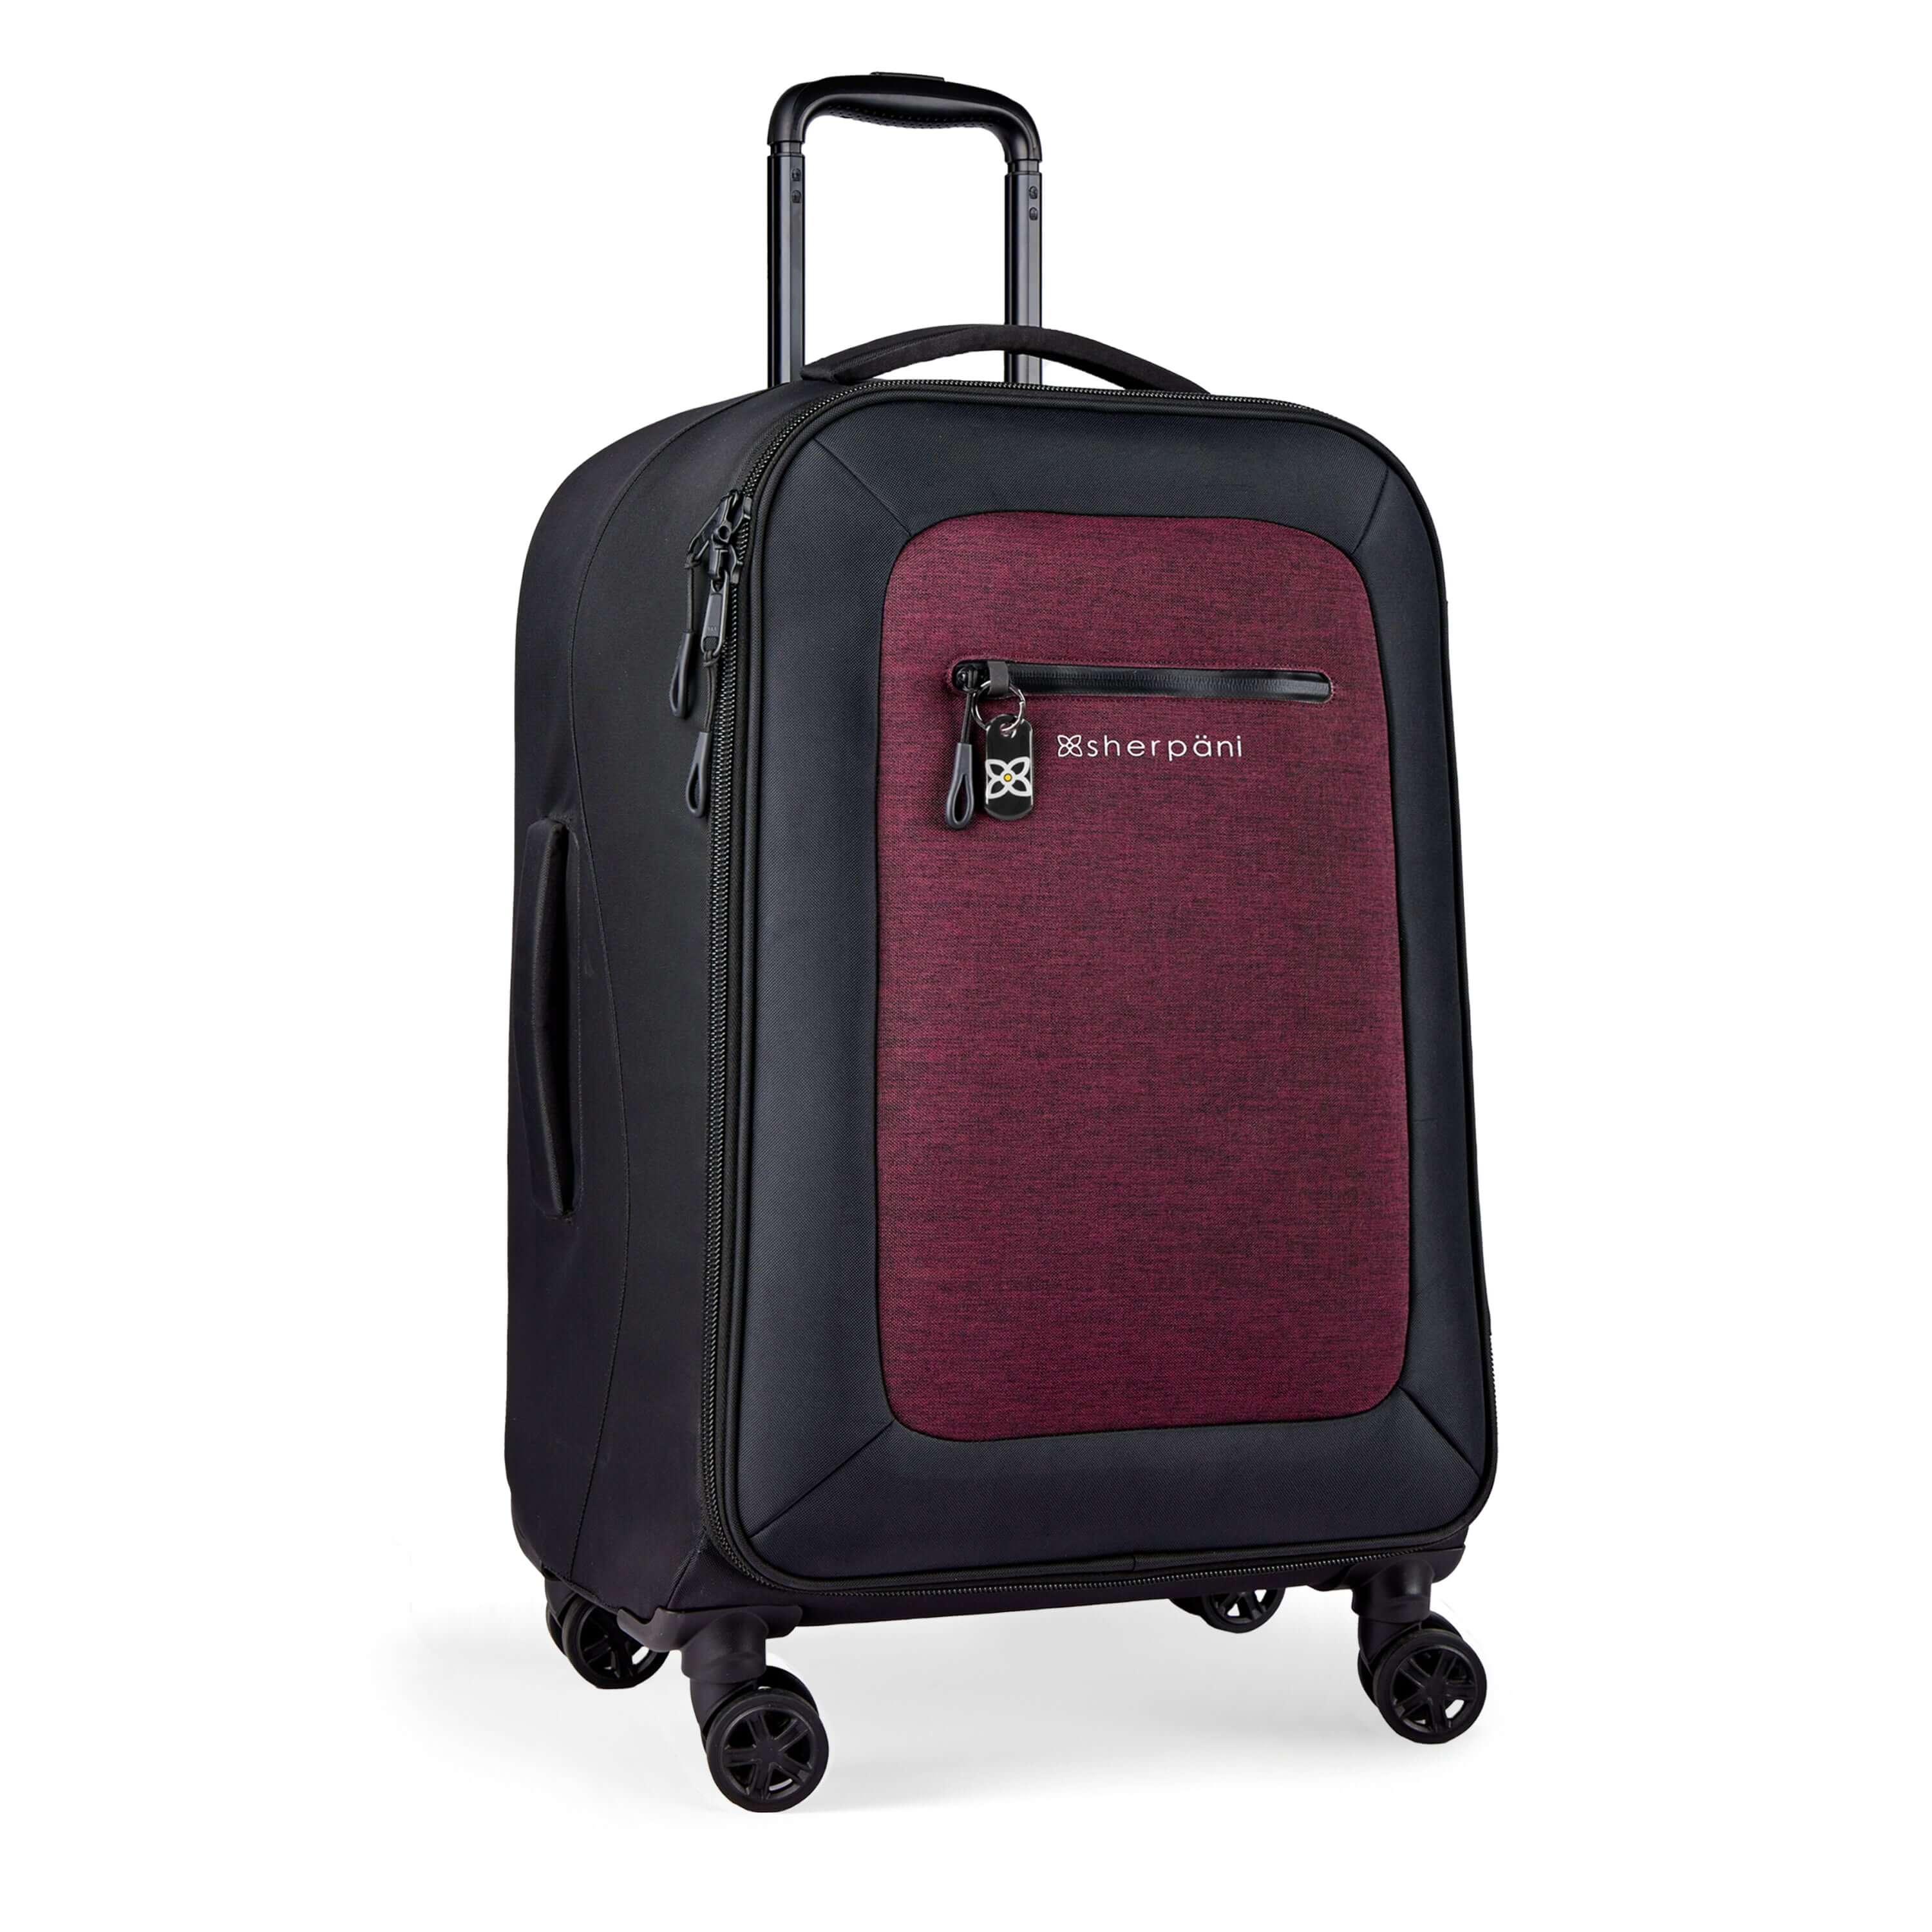 Angled front view of Sherpani’s Anti-Theft luggage the Hemisphere in Merlot. The suitcase has a soft shell exterior made from recycled plastic bottles and features vegan leather accents in black. There is a main zipper compartment and an external pocket on the front with a locking zipper and a ReturnMe tag. On the top of the suitcase sits a retractable luggage handle. On the top and side sit two easy-access handles. At the bottom are four 36-degree spinner wheels for smooth rolling. #color_merlot